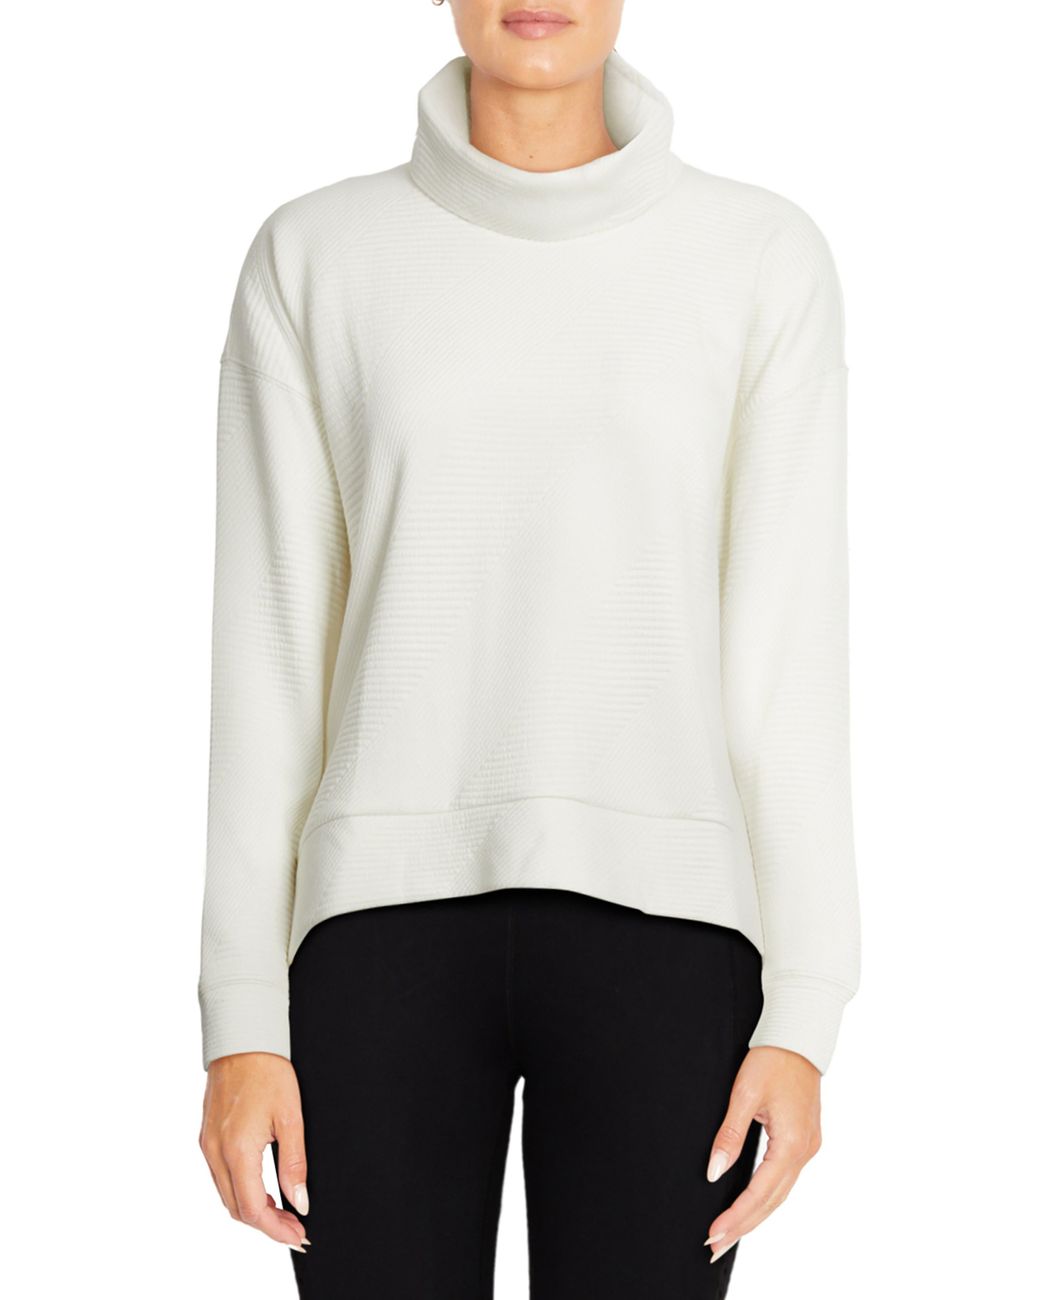 Balance Collection Marci Long Sleeve Turtleneck Top in White